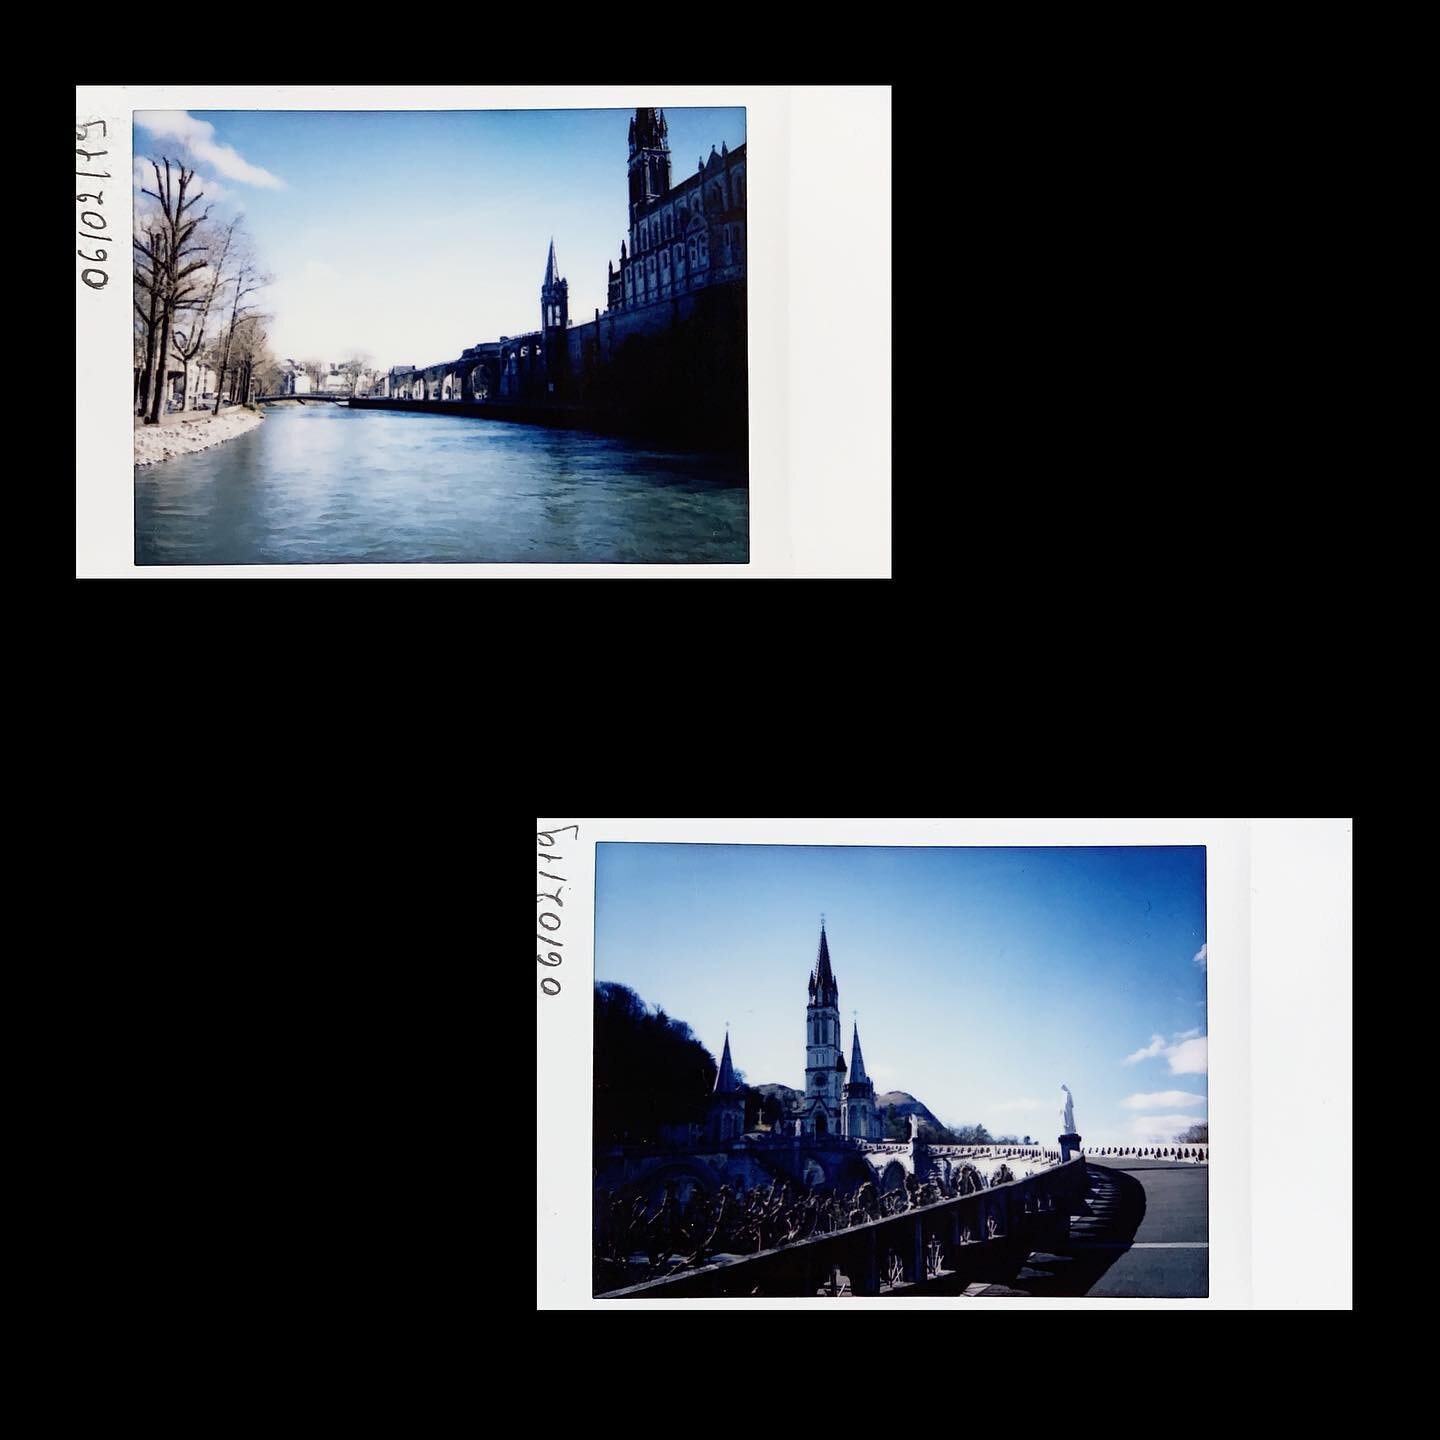 #france #polaroid #polaroids #instantphoto #photography #fujifilm #instax #photo #photos #pic #pics #picture #pictures #snapshot #art #picoftheday #photooftheday #color #exposure #travel #traveling #vacation #visiting #trip #myinstax #cathedral #lour